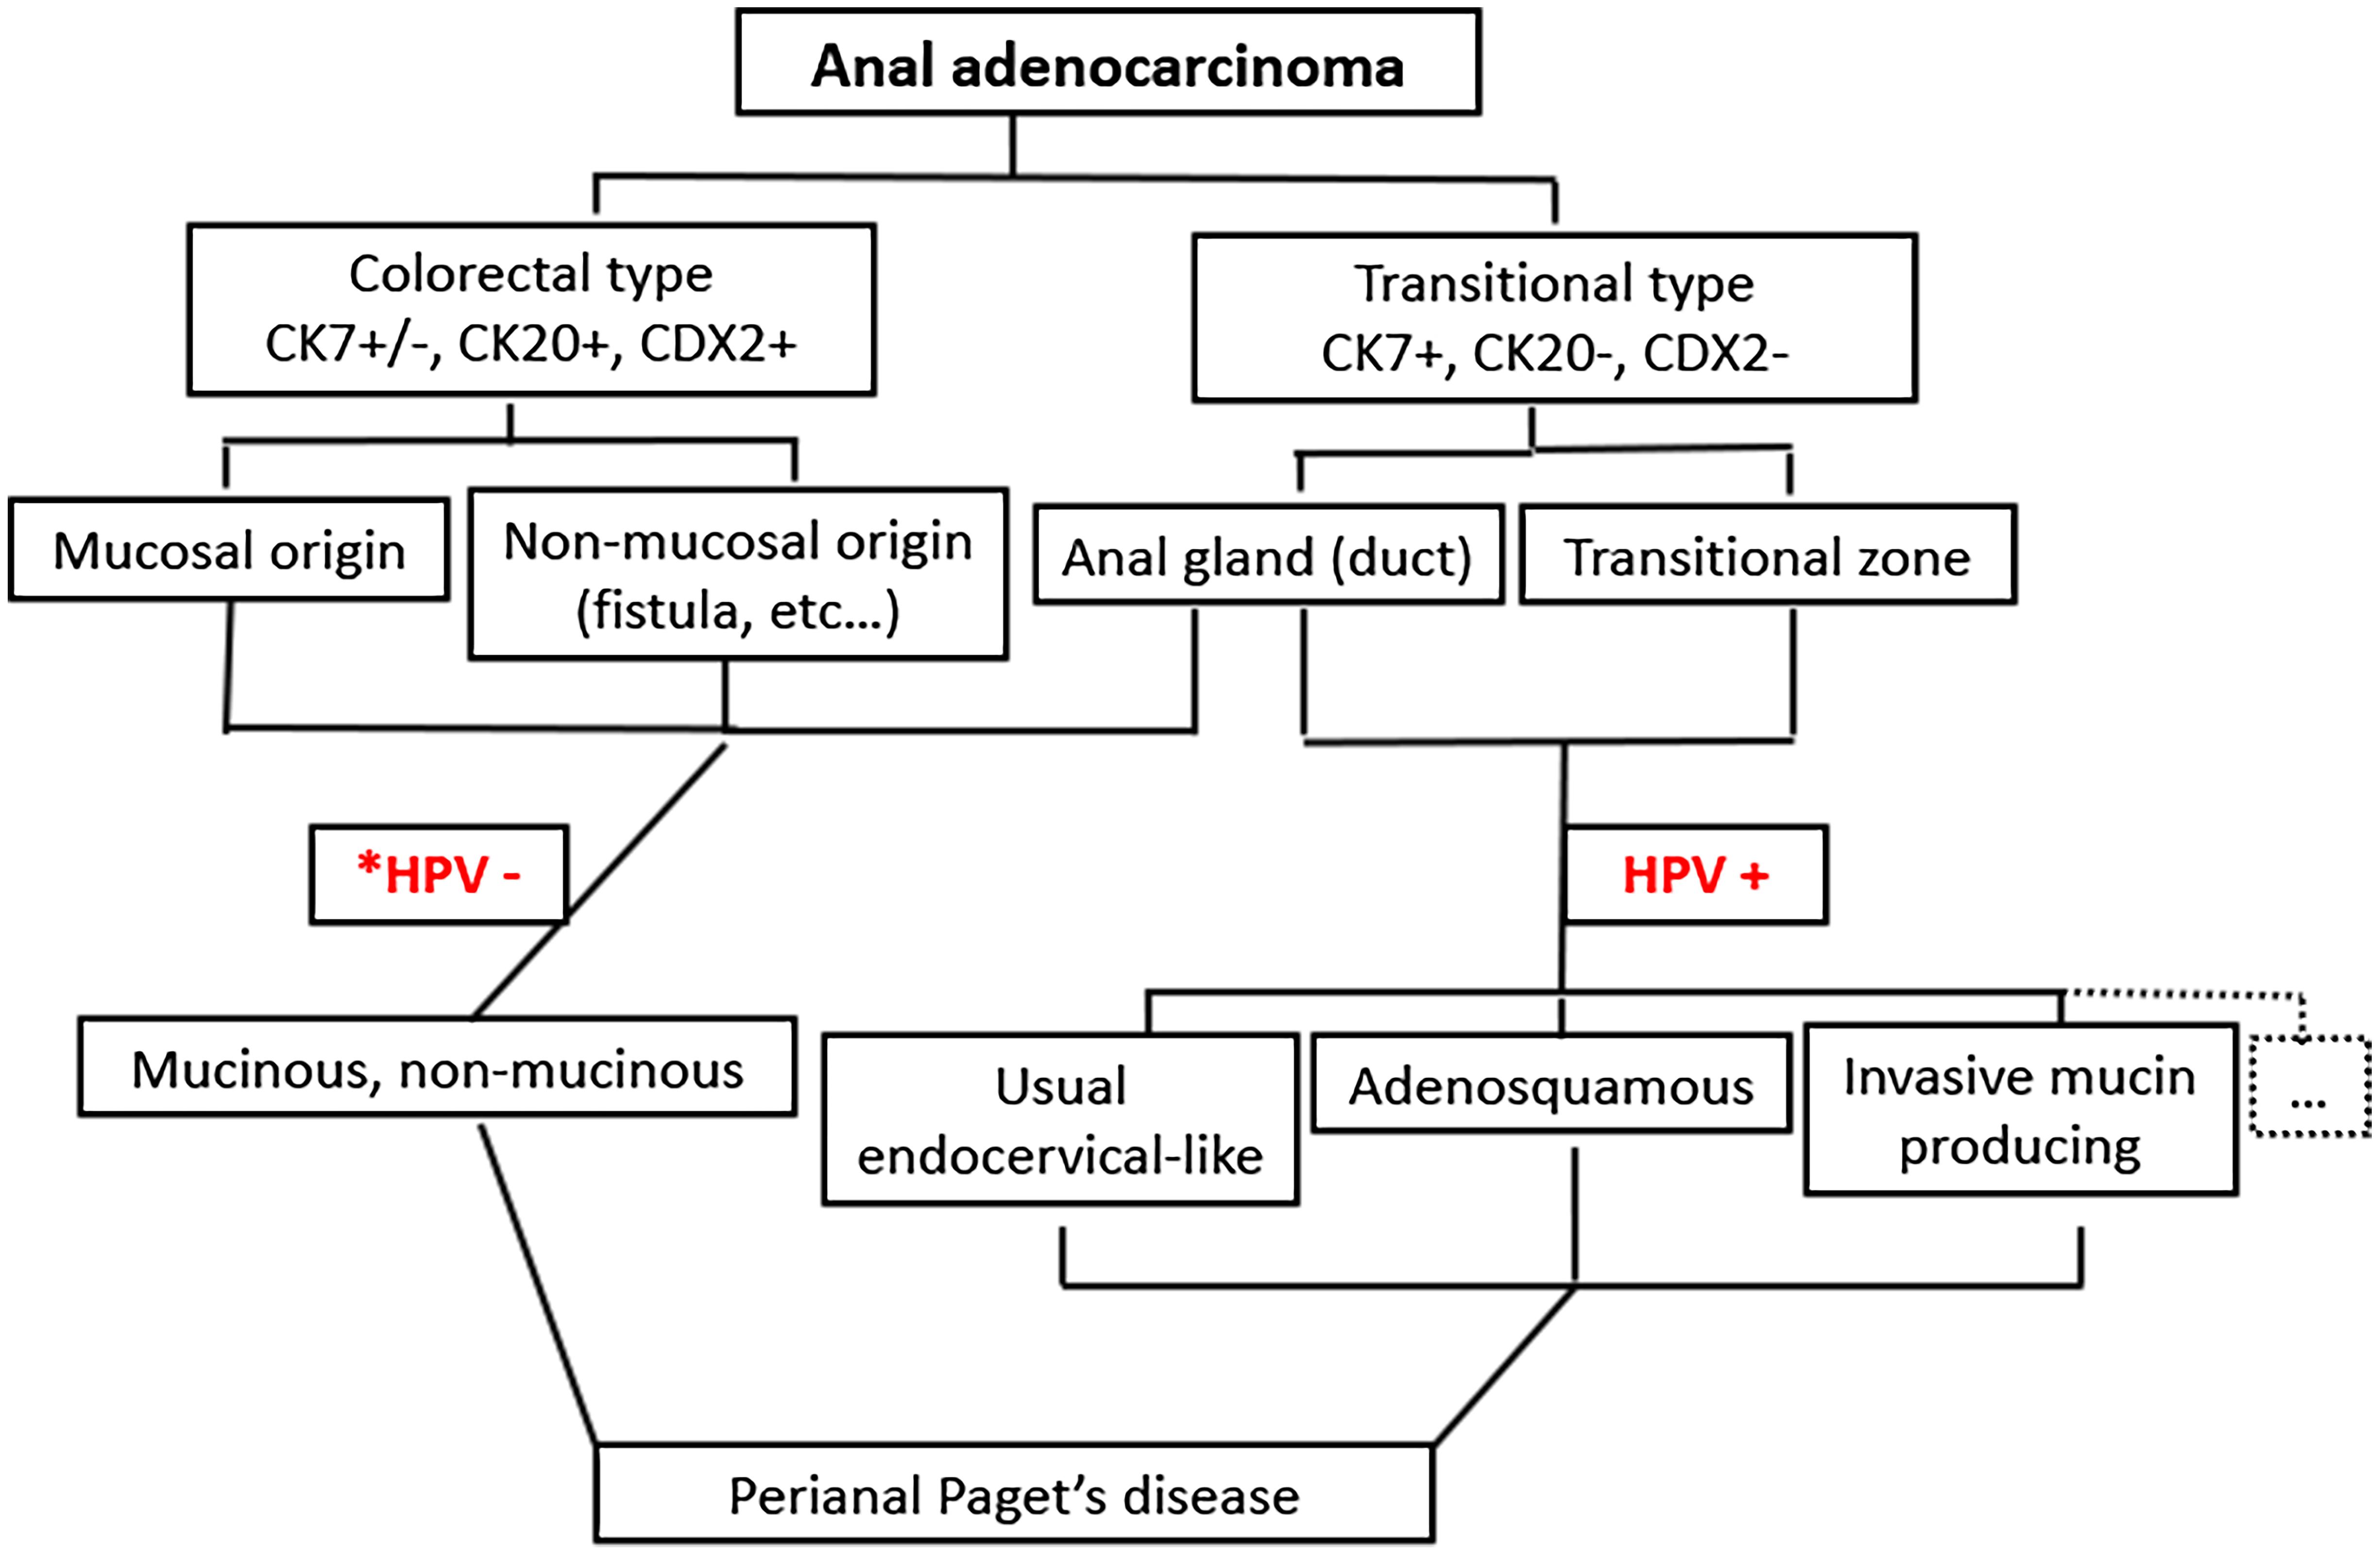 A proposed classification scheme for anal adenocarcinoma based on cell origin, HPV status, location, and immune profiles.